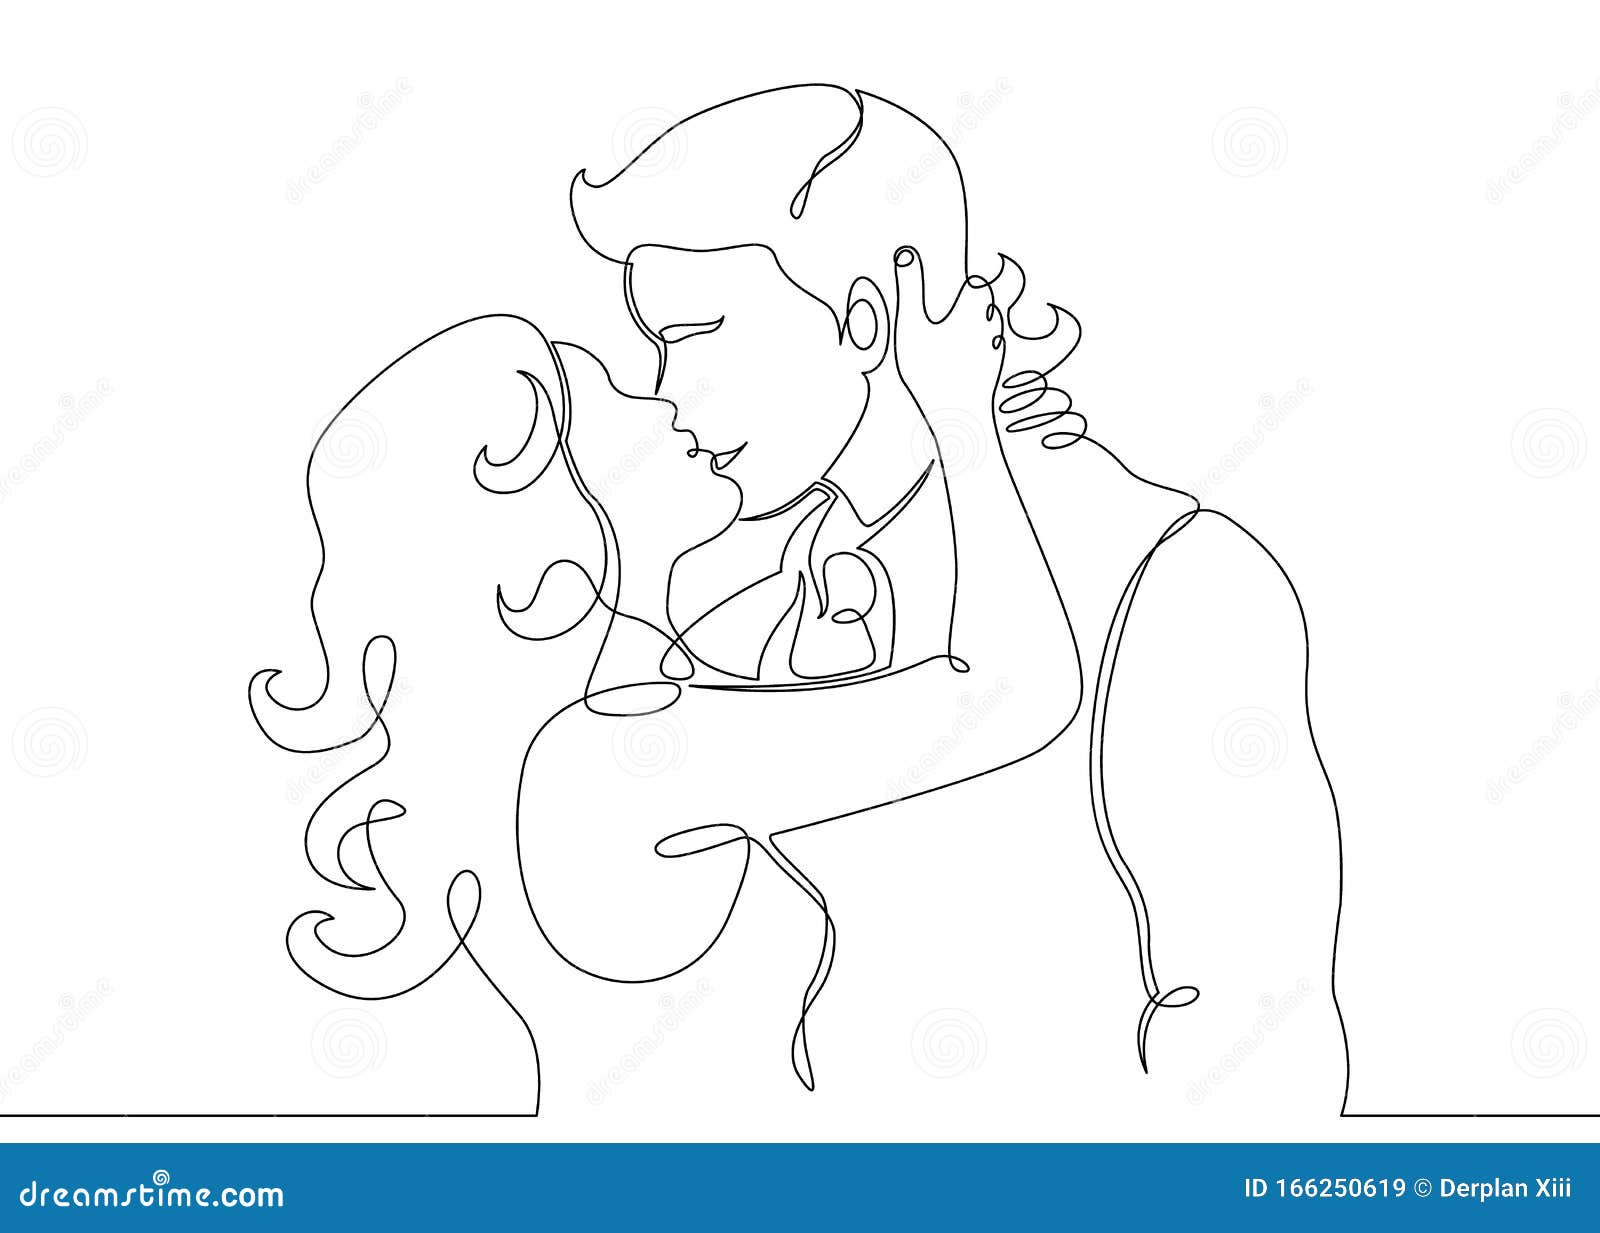 continuous one drawn single line of romantic kiss